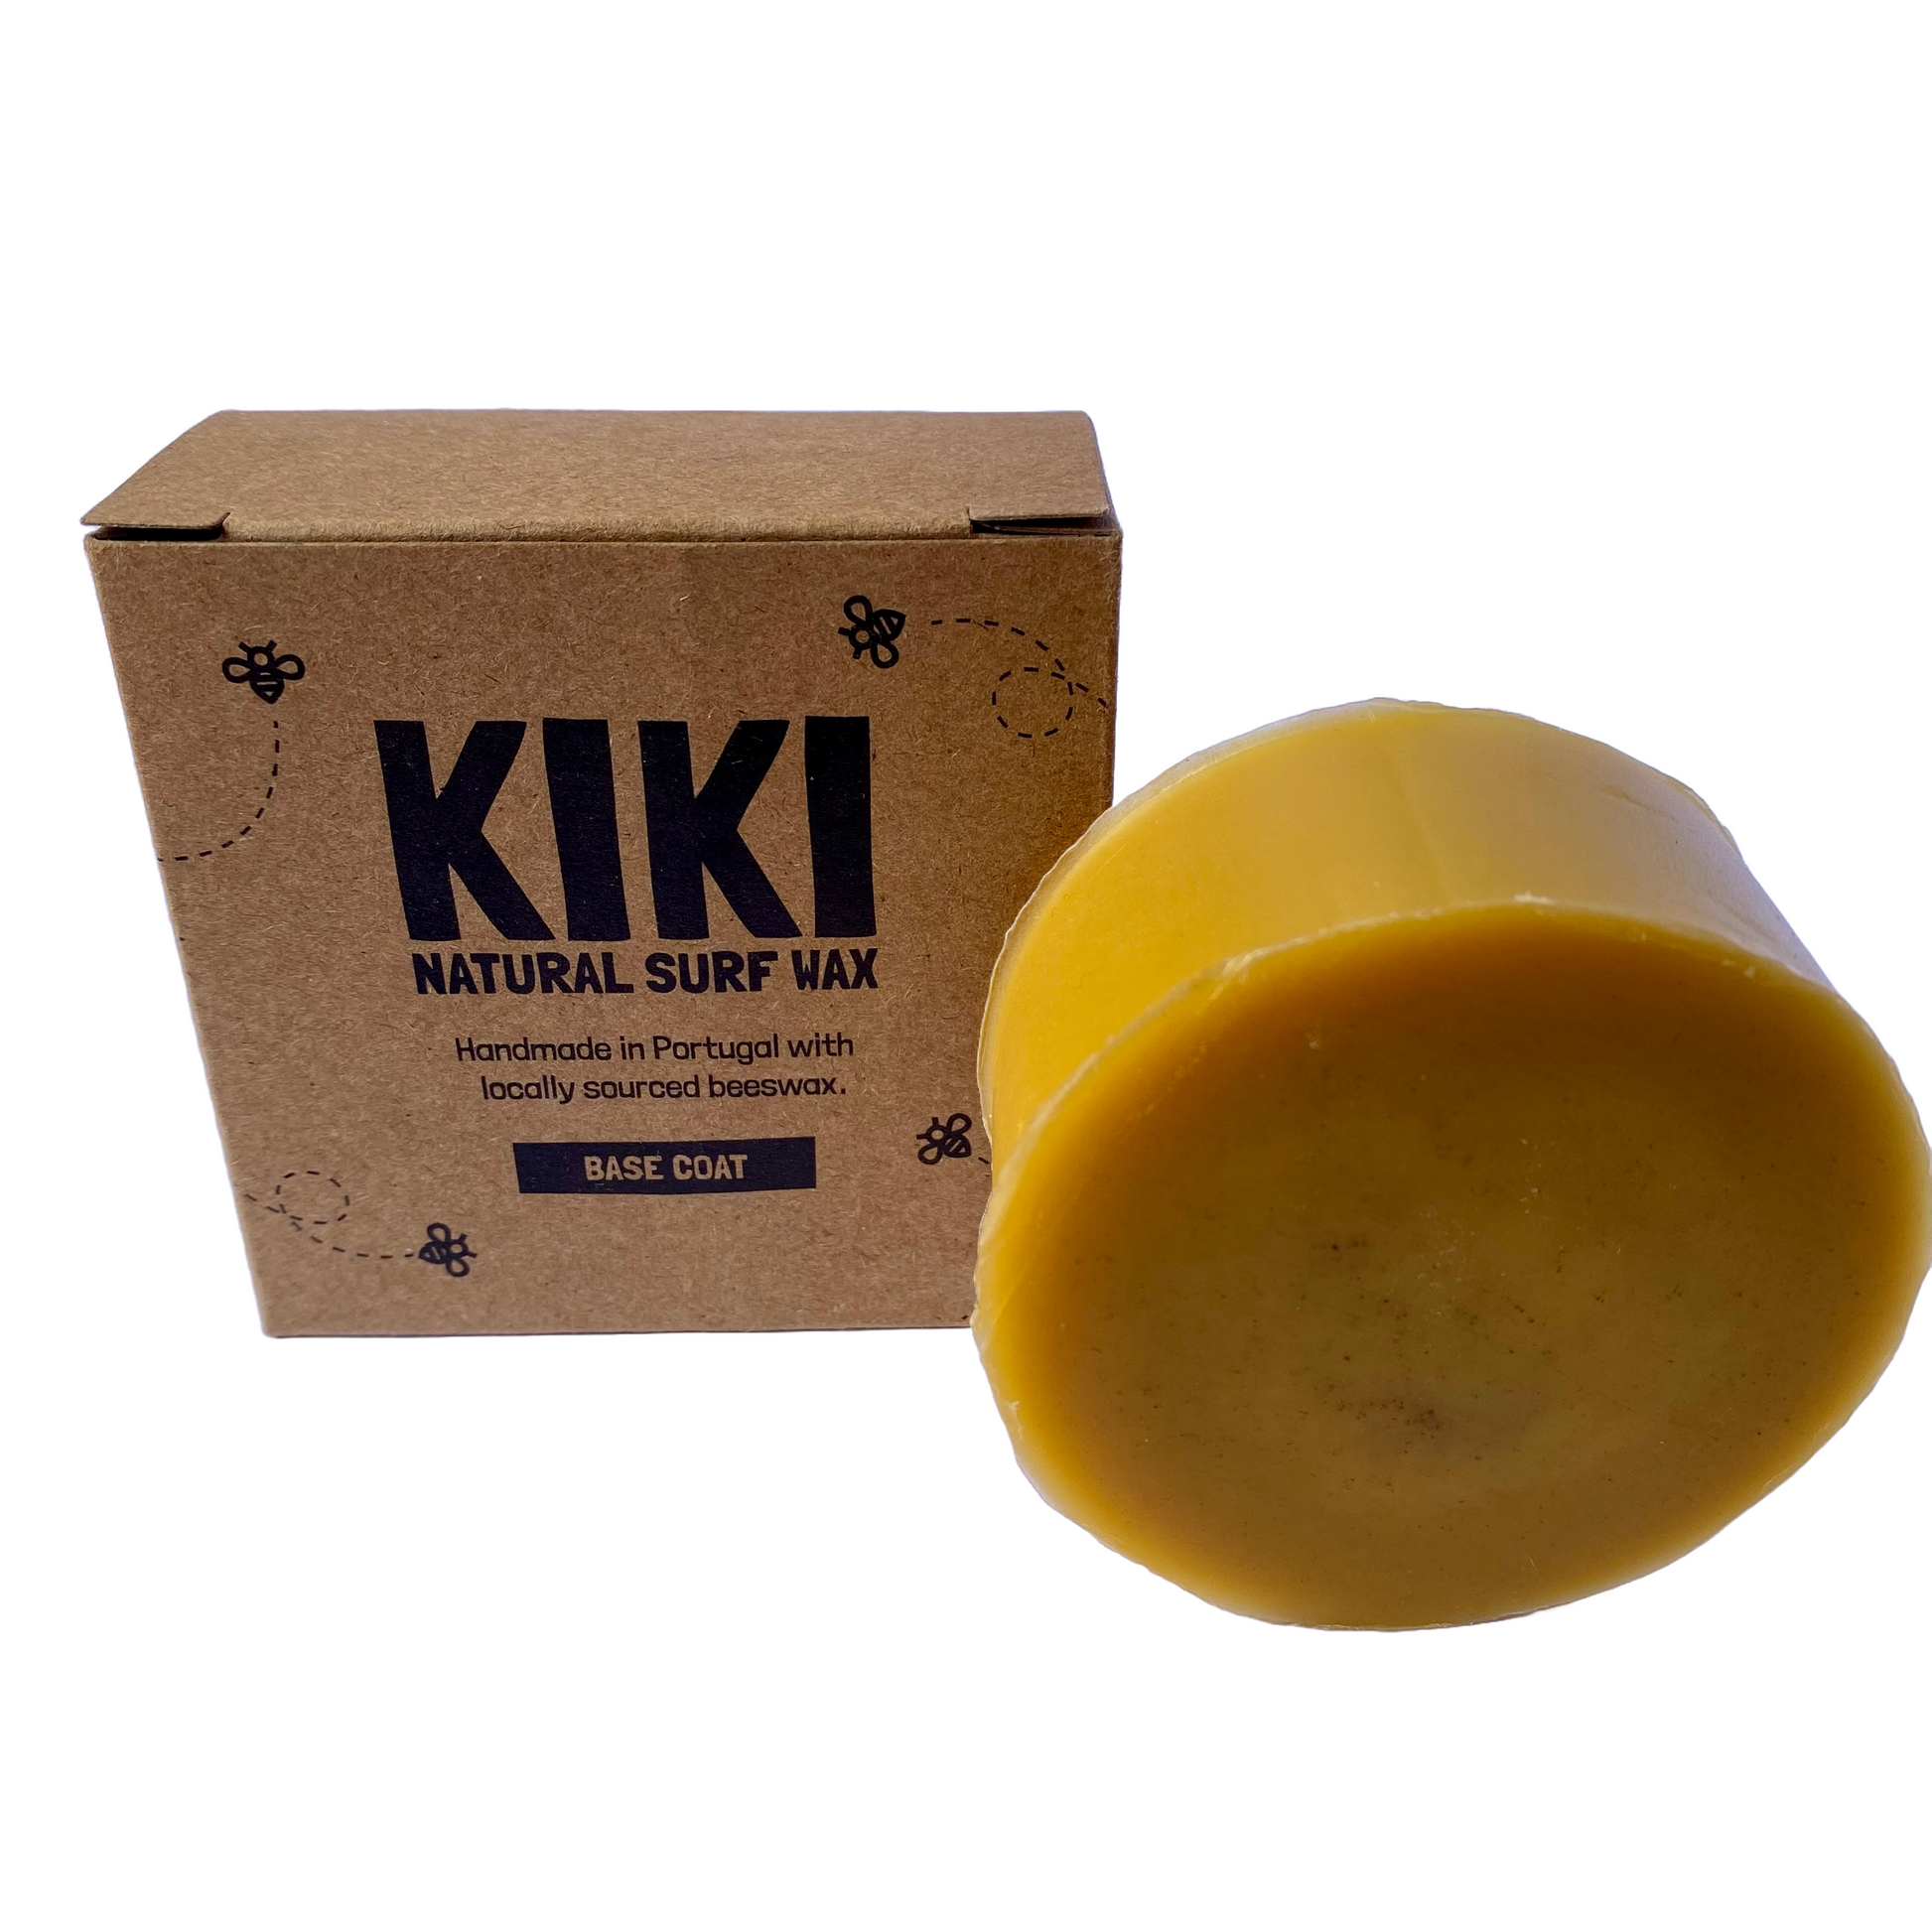 Image of a round orange block of surf wax standing next to it's box. The box reads "KIKI NATURAL SURF WAX. Hand made in Portugal with locally sourced beeswax".